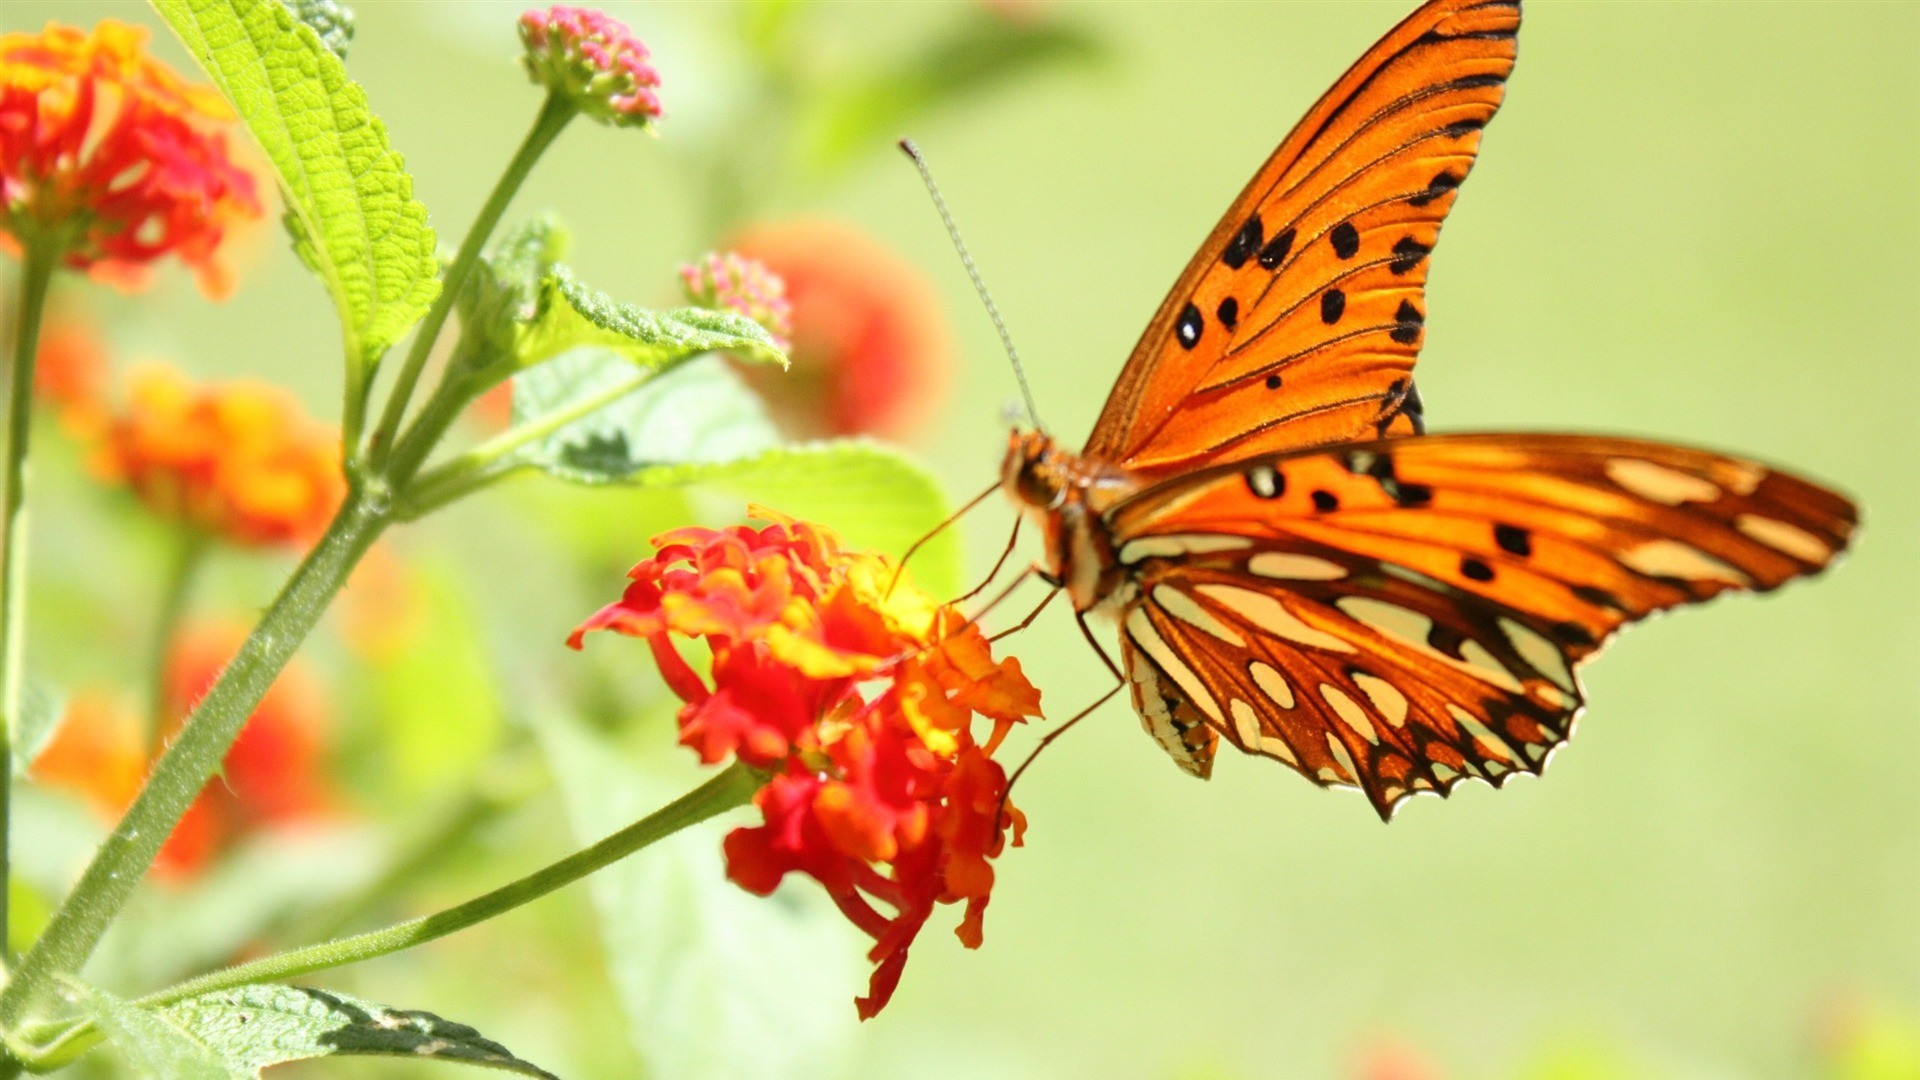 HD butterfly hd wallpapers 1080p For Your Image Wallpapers with